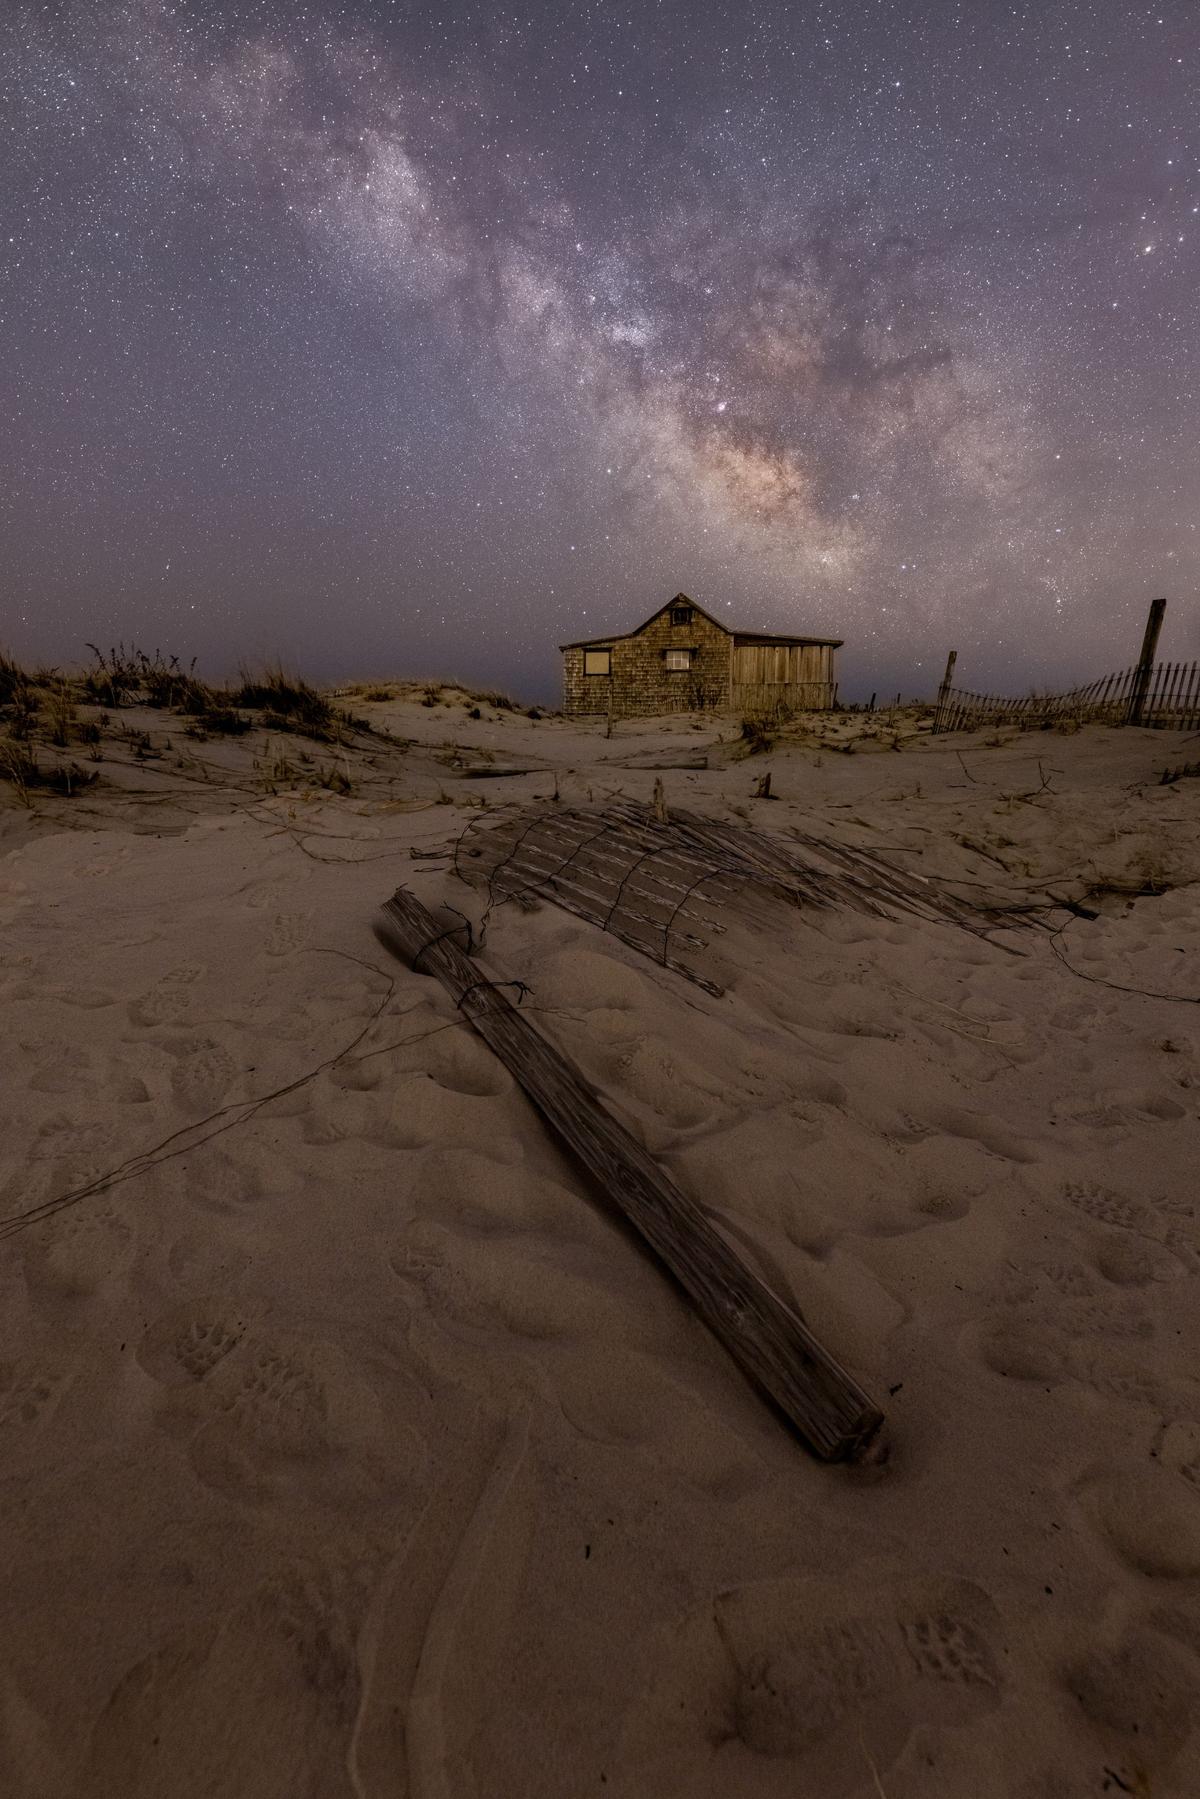 A photo Mike Carroll captured of the shack and the Milky Way that same morning. (Kennedy News and Media)